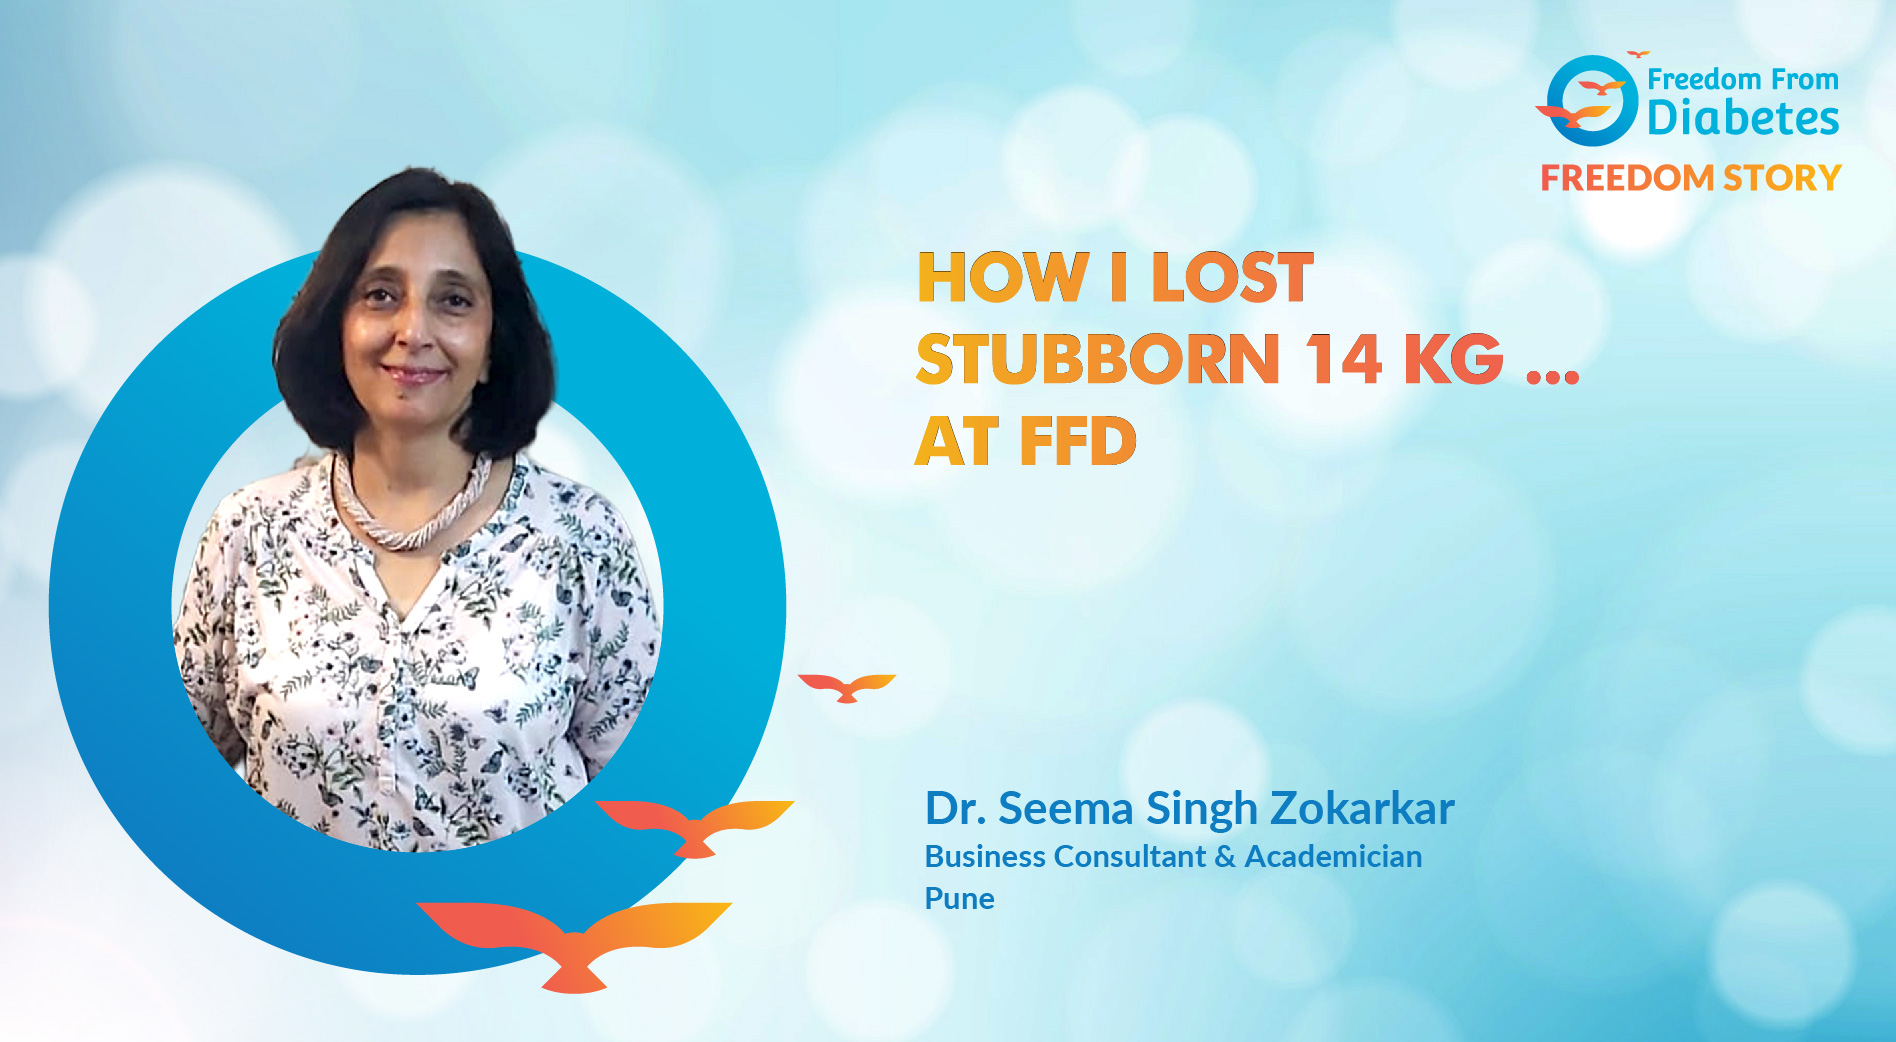 Seema Zokarkar: Only FFD could move by stubborn weight.